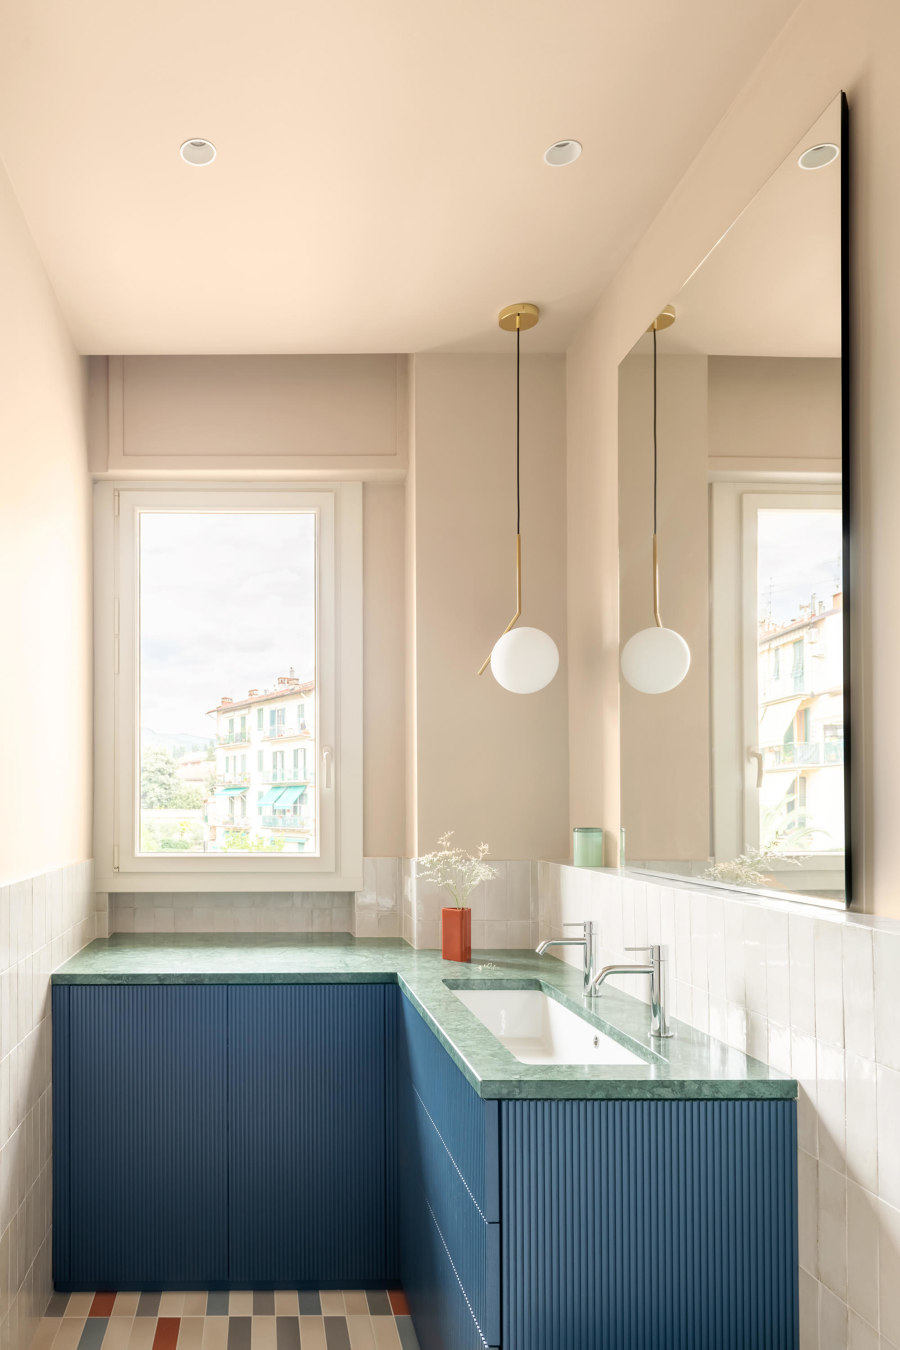 Top ten: curated bathrooms with wood surfaces | Novità